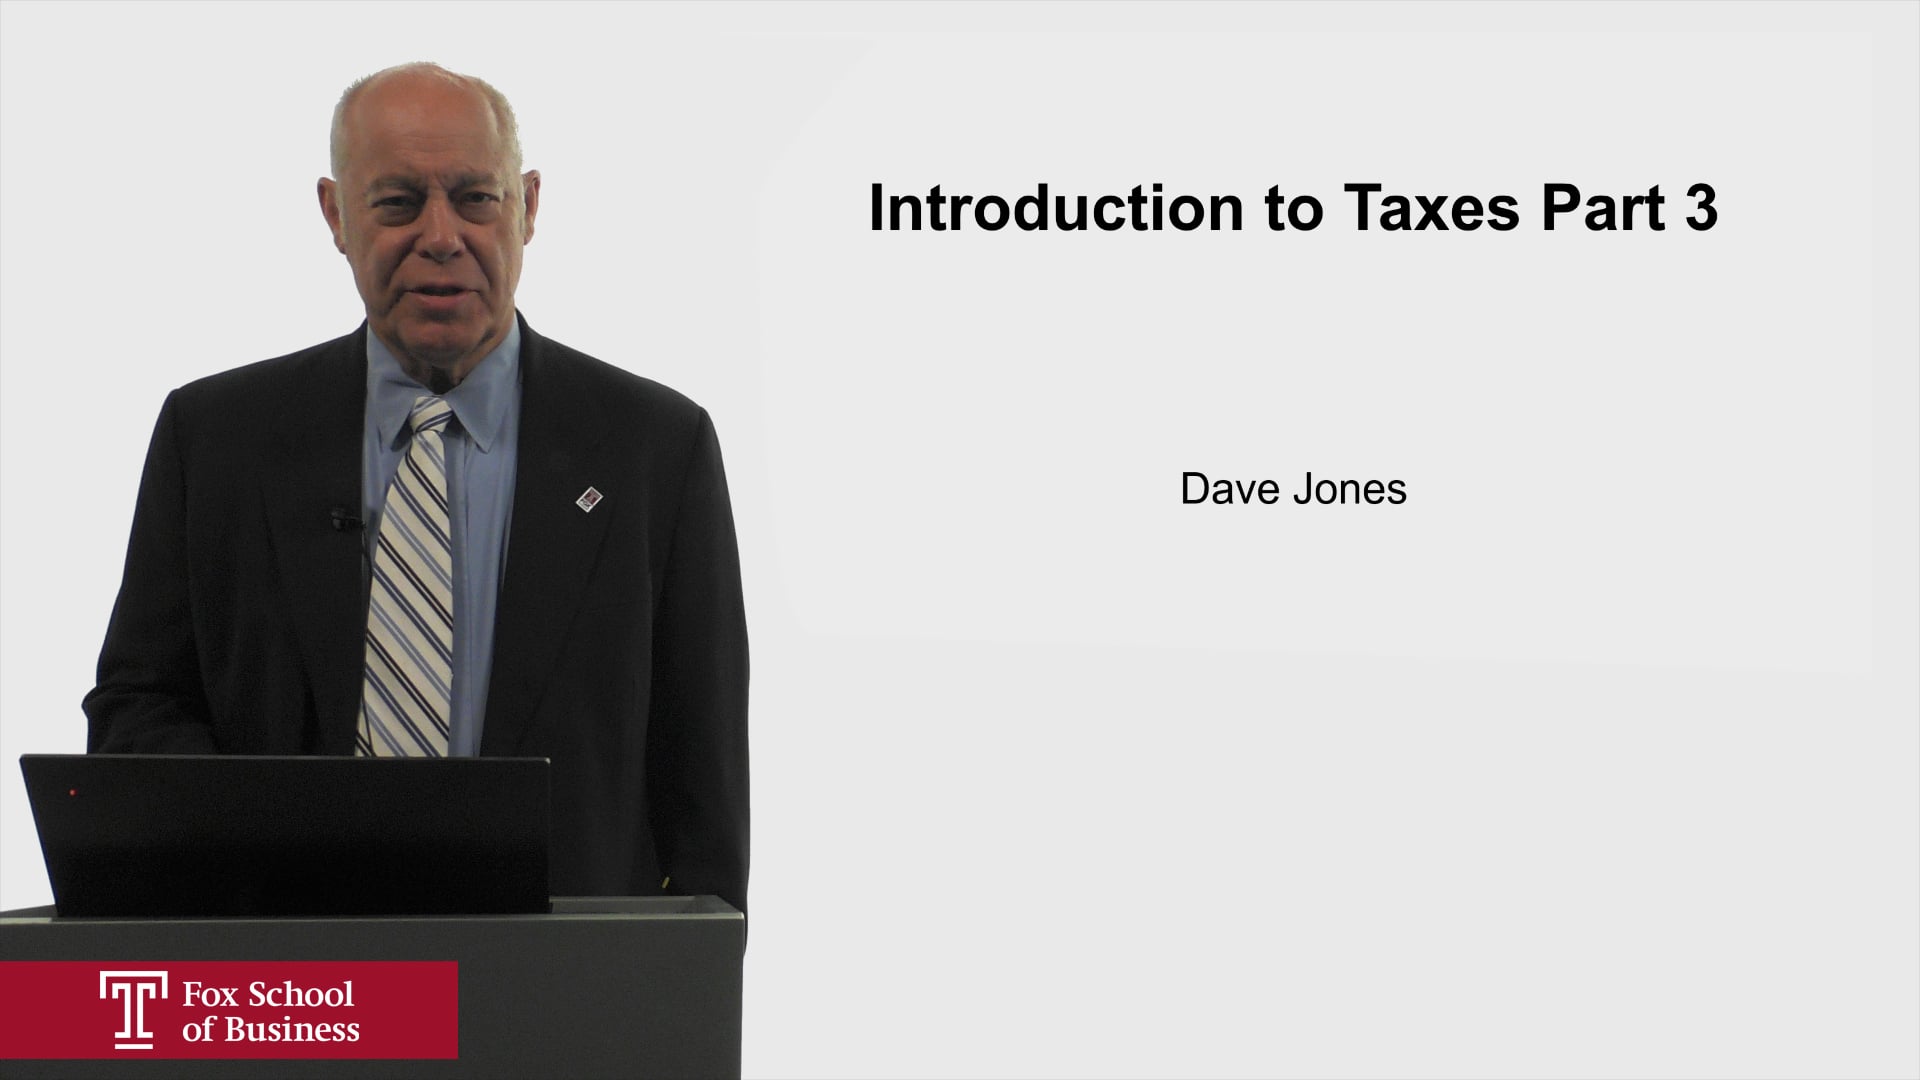 Introduction to Taxes Part 3